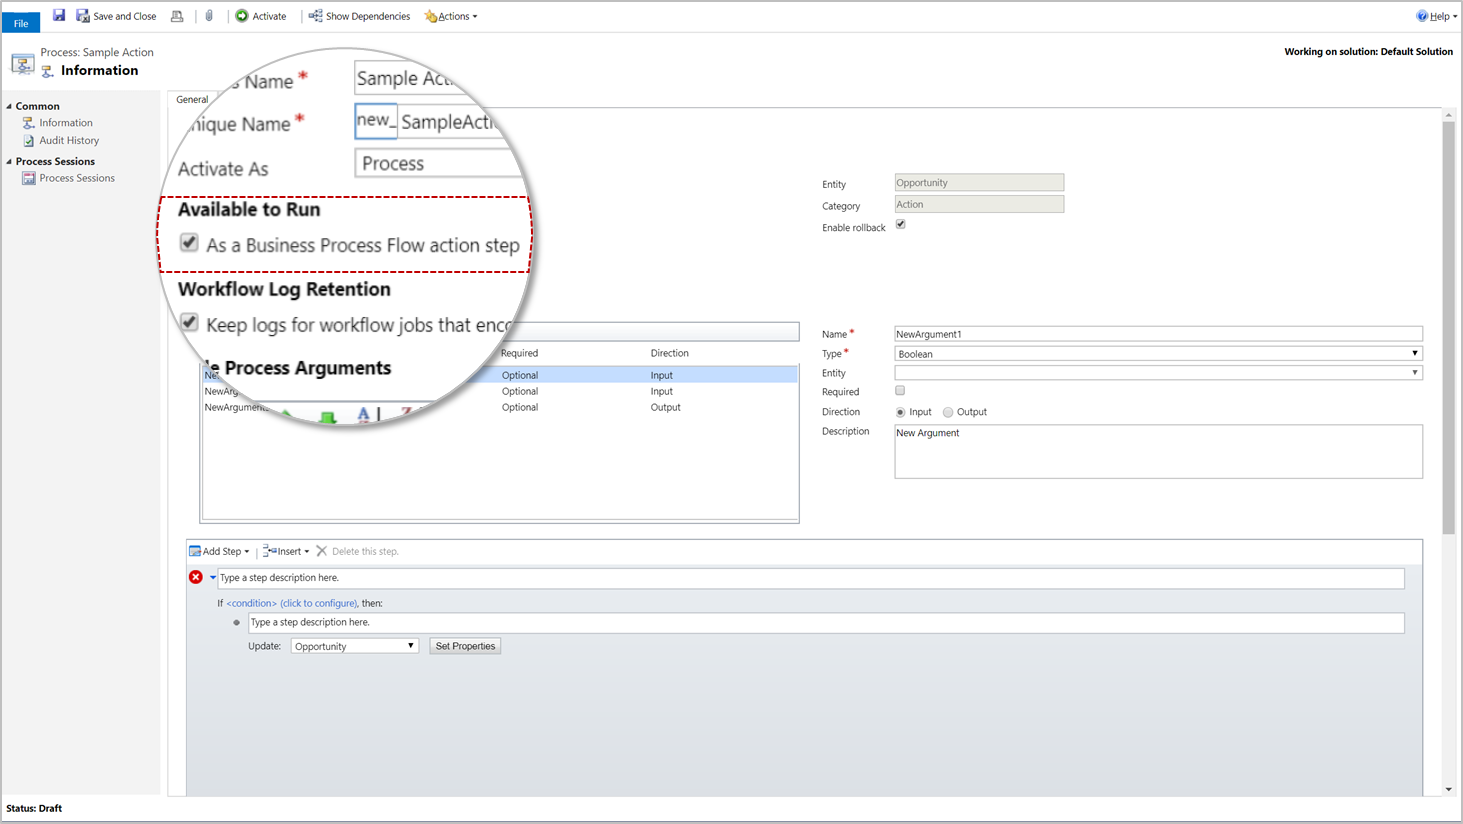 Enable Available to run as a Business Process Flow Action Step check box